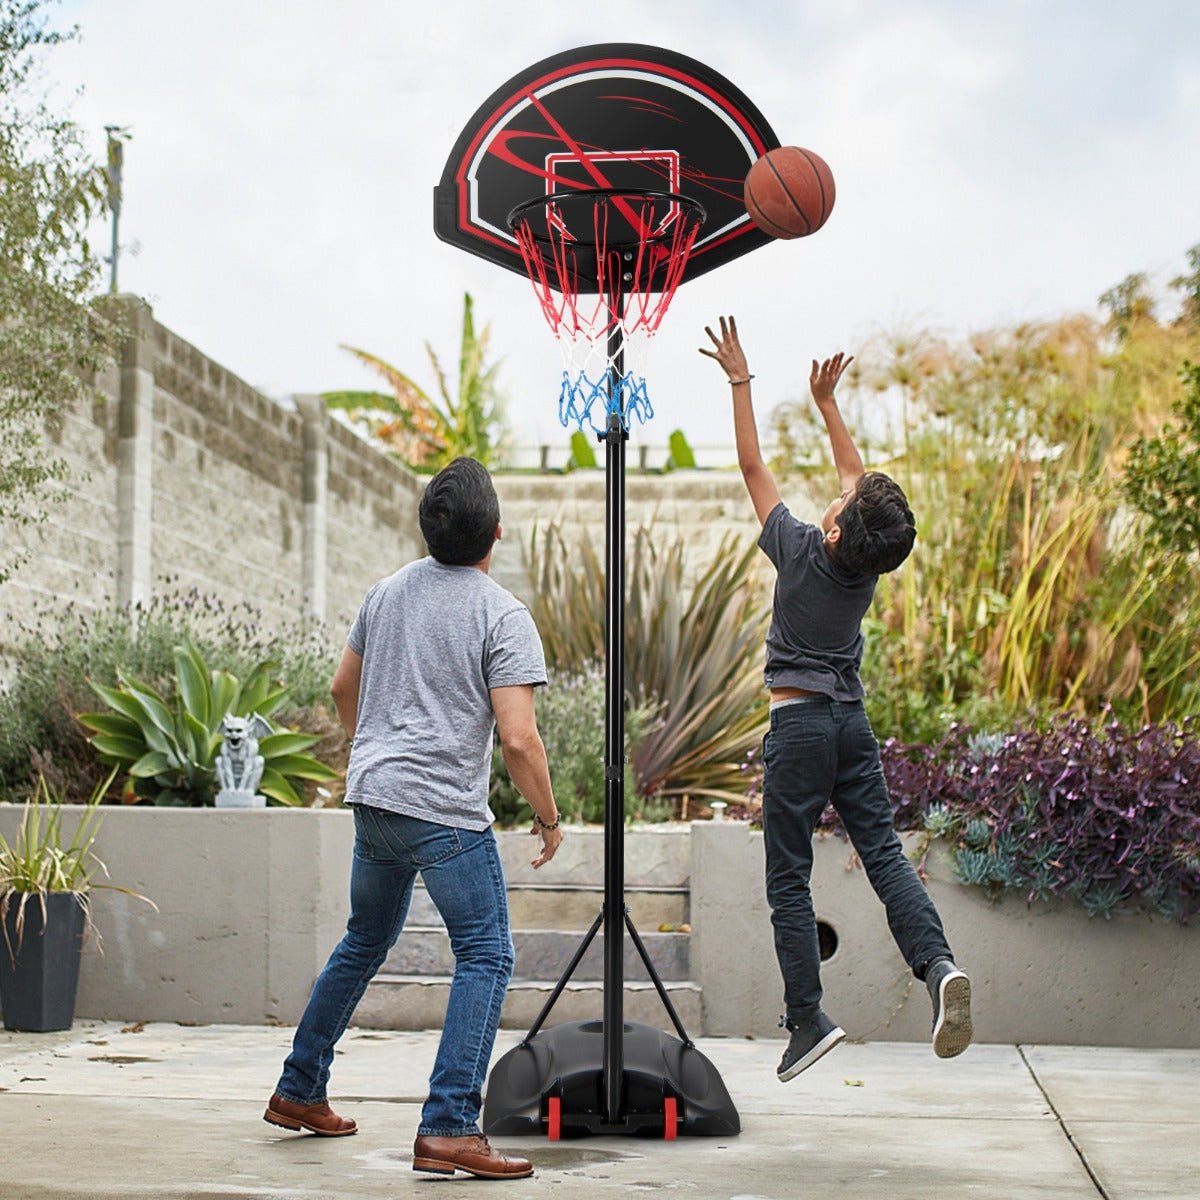 Experience the Thrill of Hoops - Buy Your System Today!